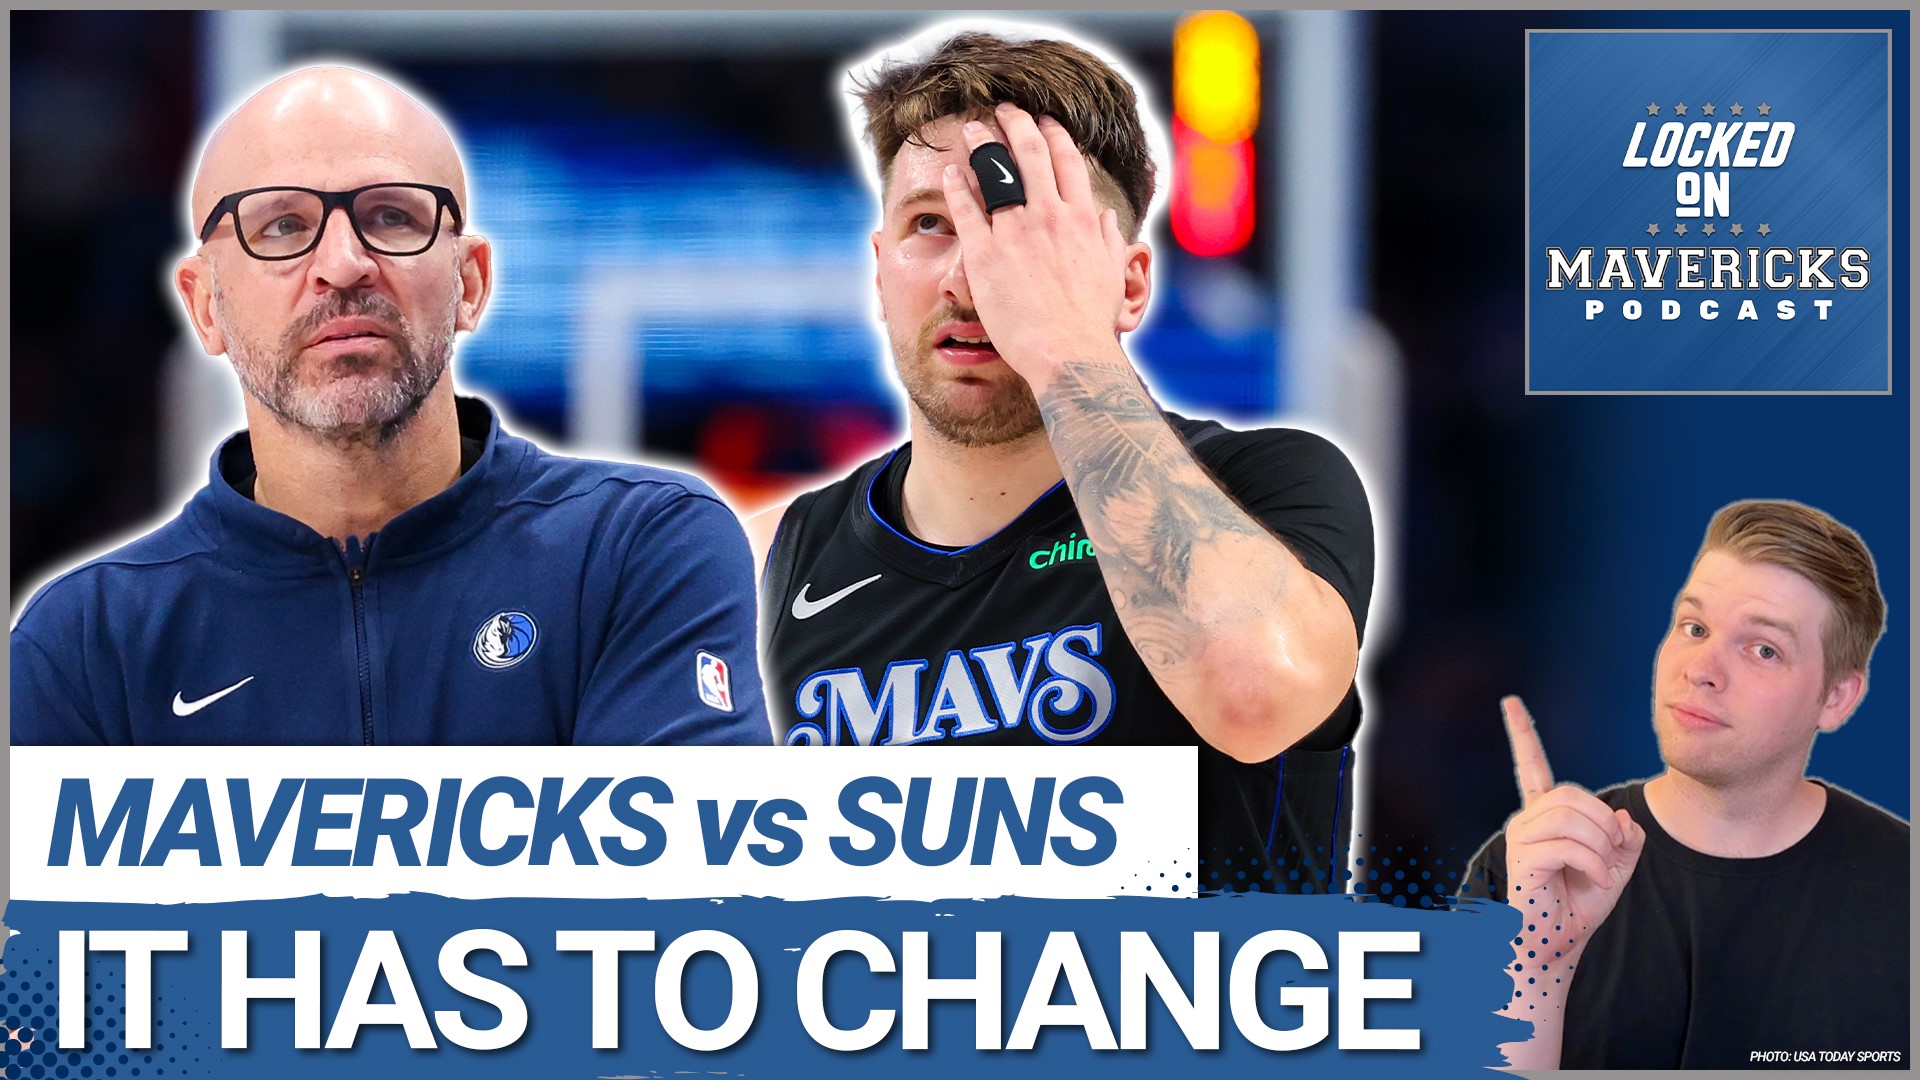 Nick Angstadt & Slightly Biased react to the Dallas Mavericks awful loss to the Suns and why Luka Doncic, Jason Kidd, and the Mavs need a change.